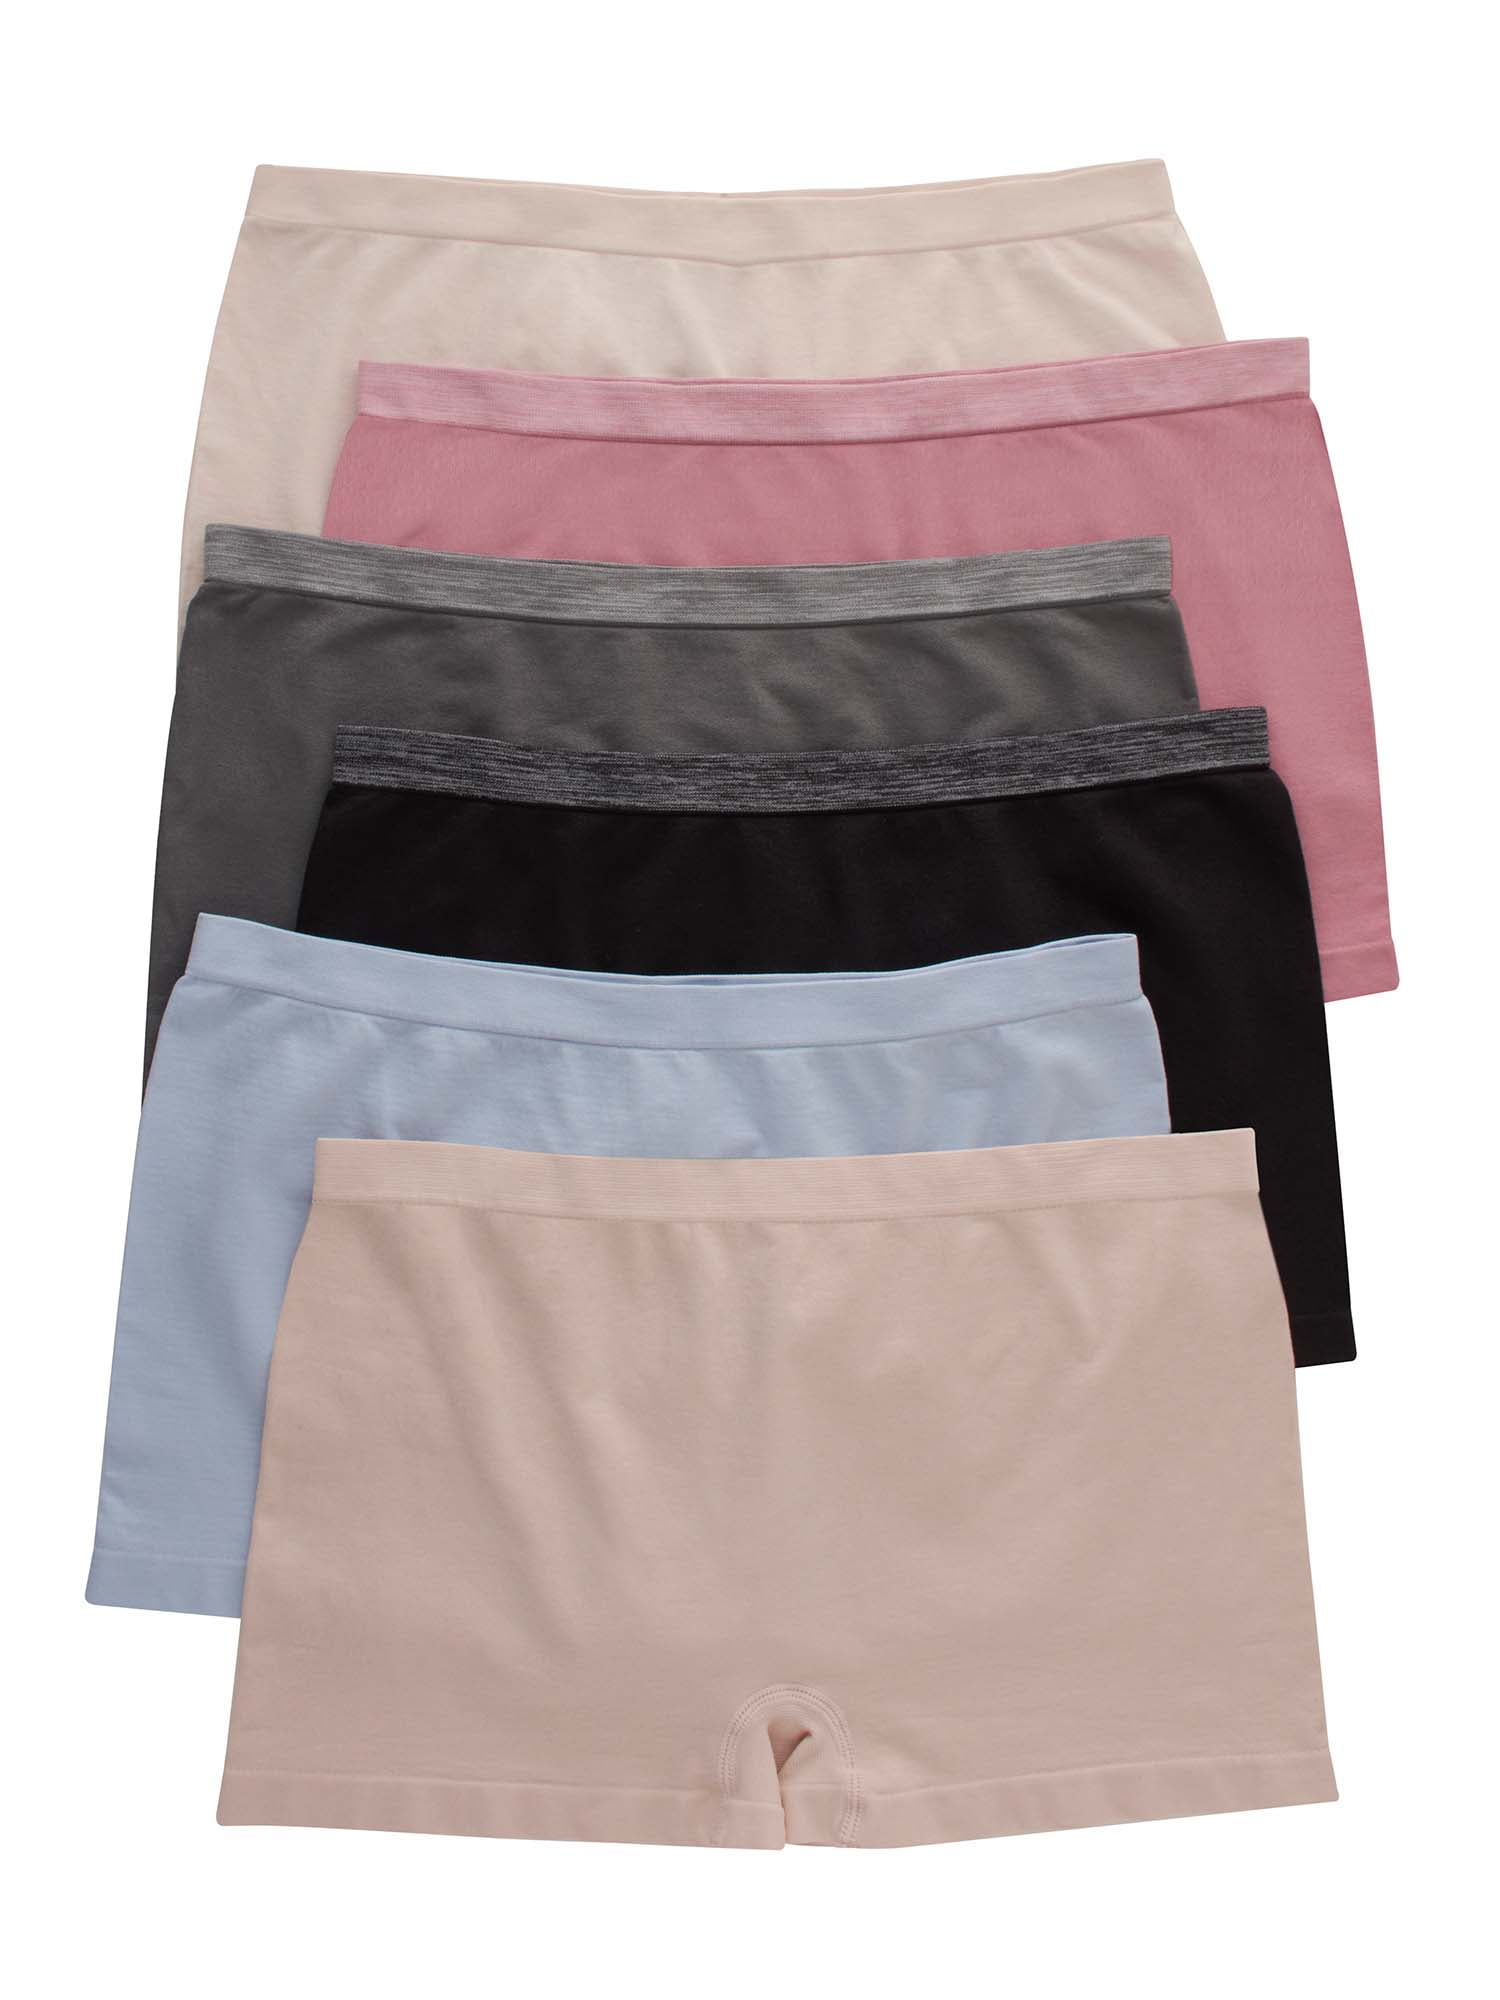 Hanes® Premium Women's Smoothing Seamless 3pk Briefs - Colors May